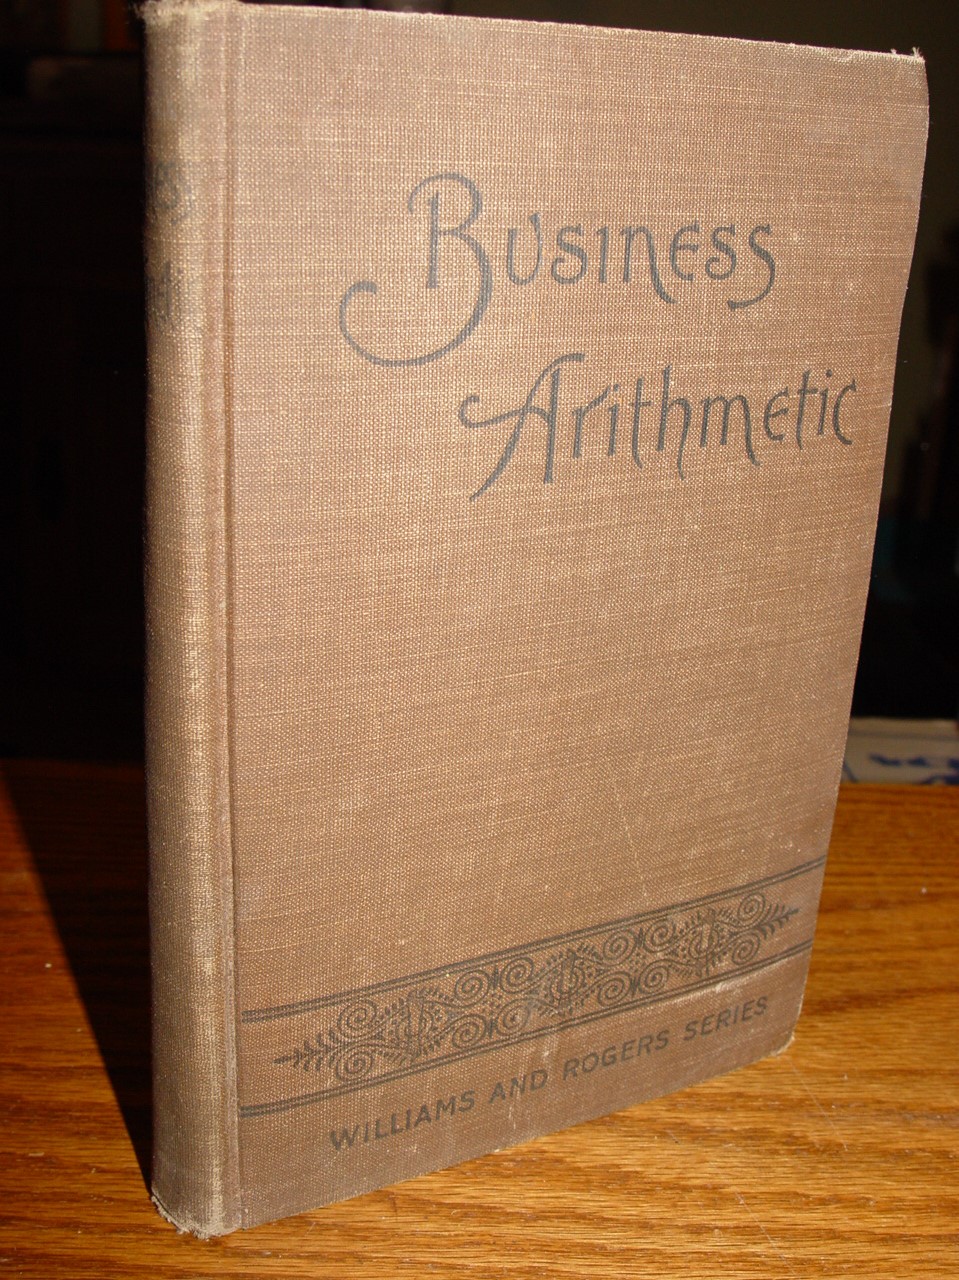 Business Arithmetic 1891 Williams and Rogers by
                J.E. King